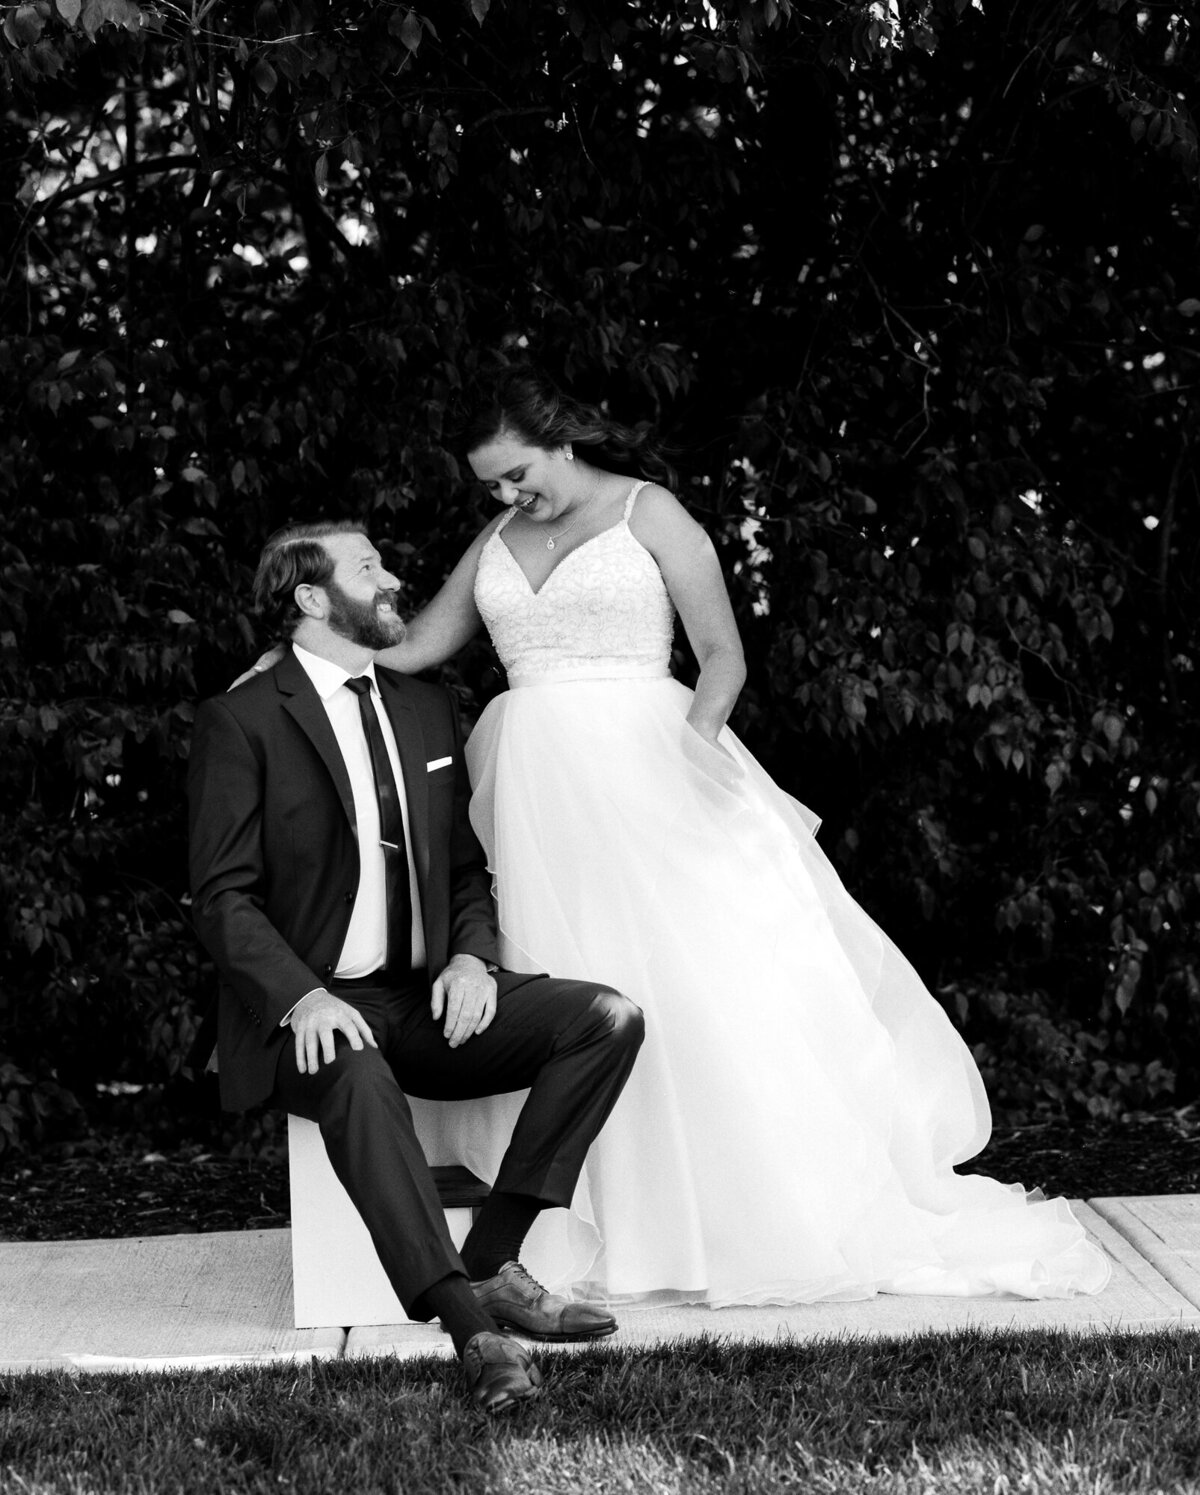 Lots of laughs during wedding day portraits